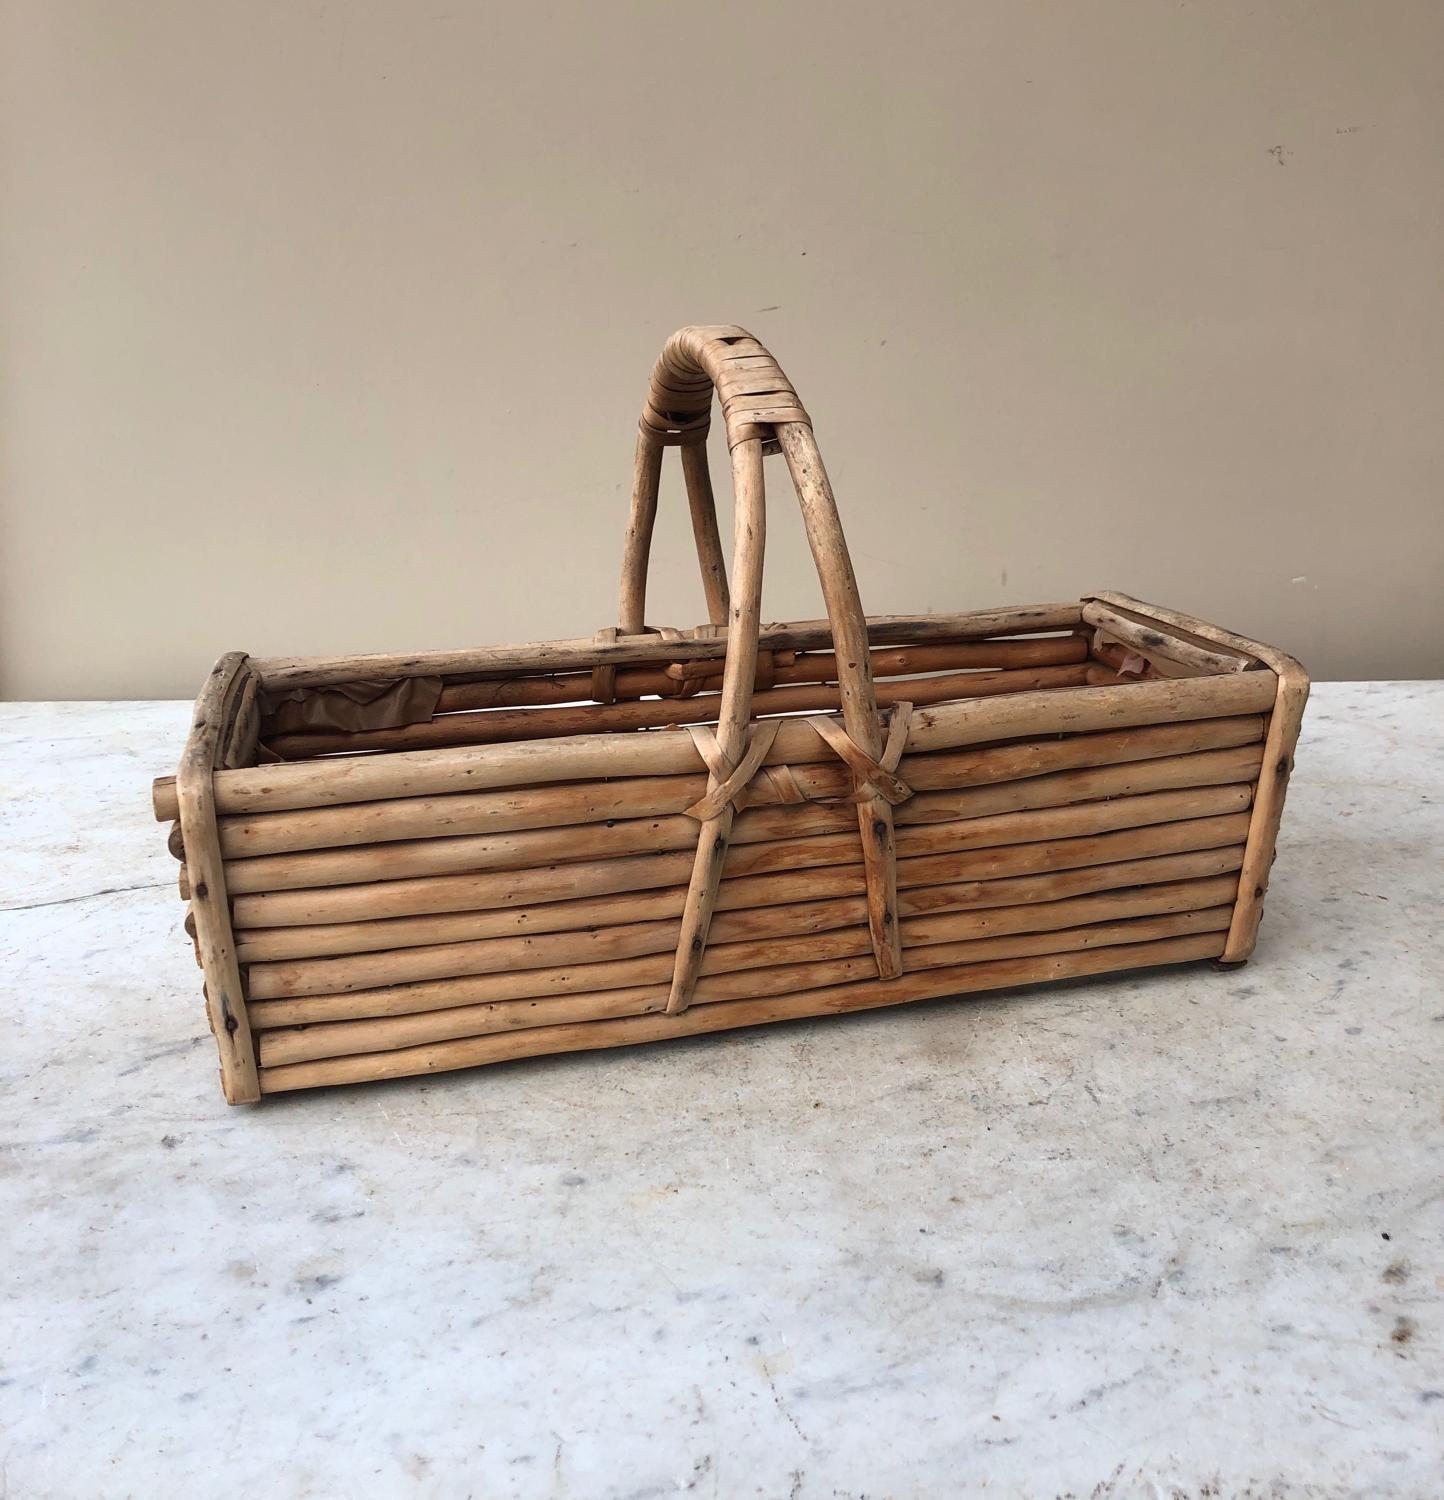 Early 20th Century Wooden Basket - Trug